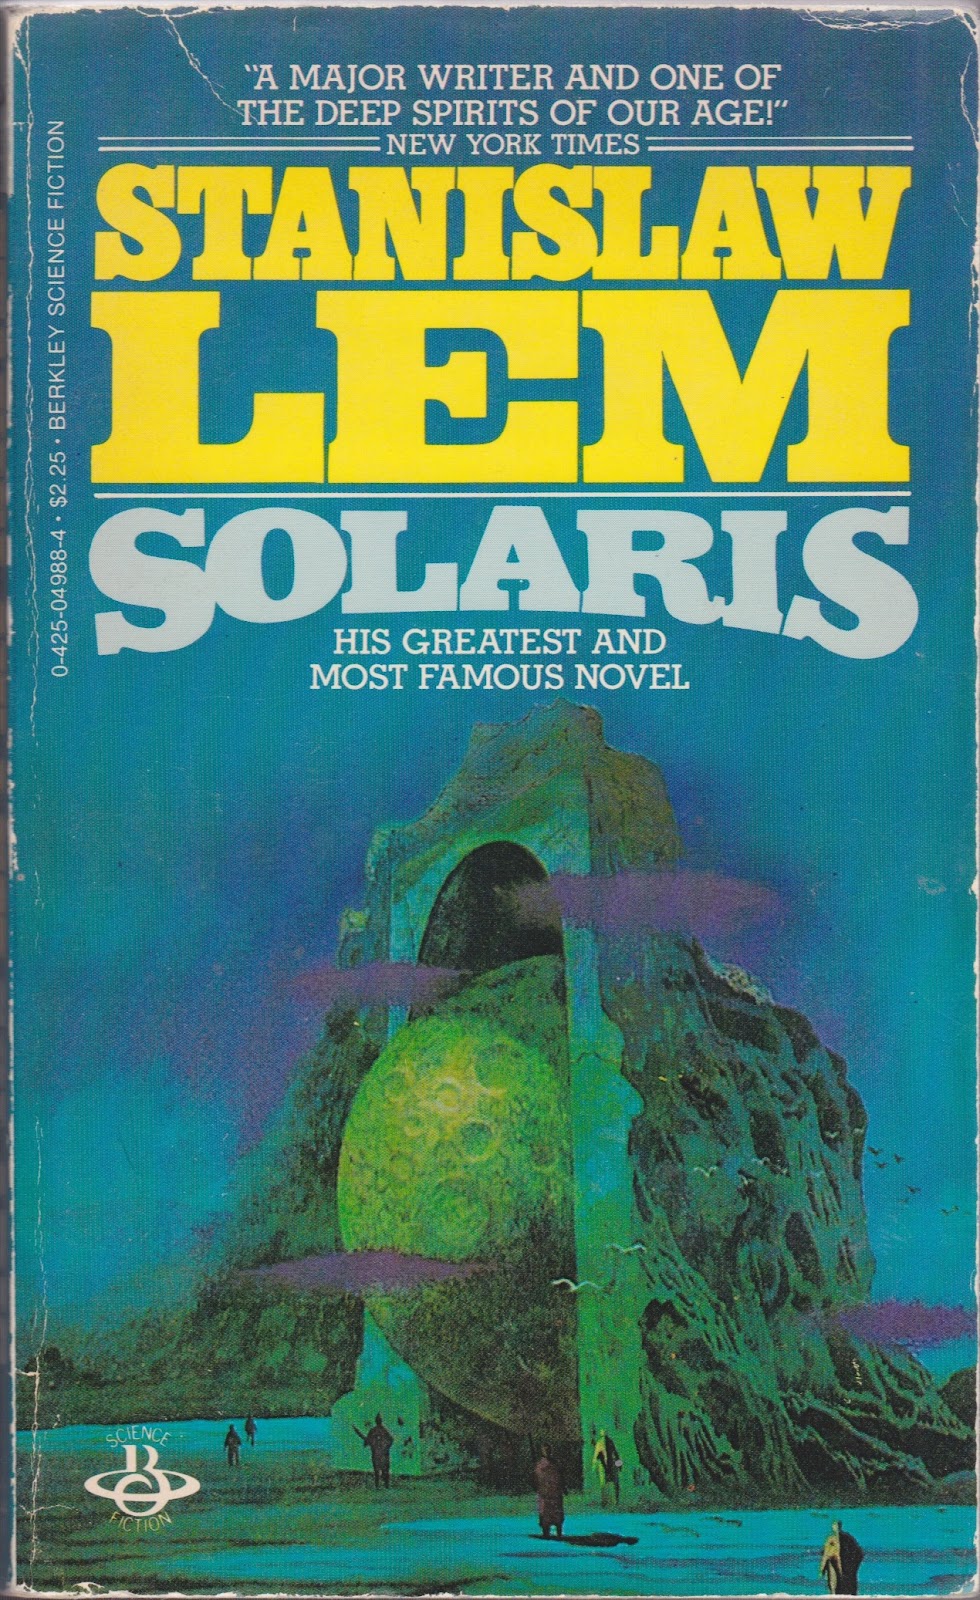 Cover of the paperback of Solaris by Stanislaw Lem